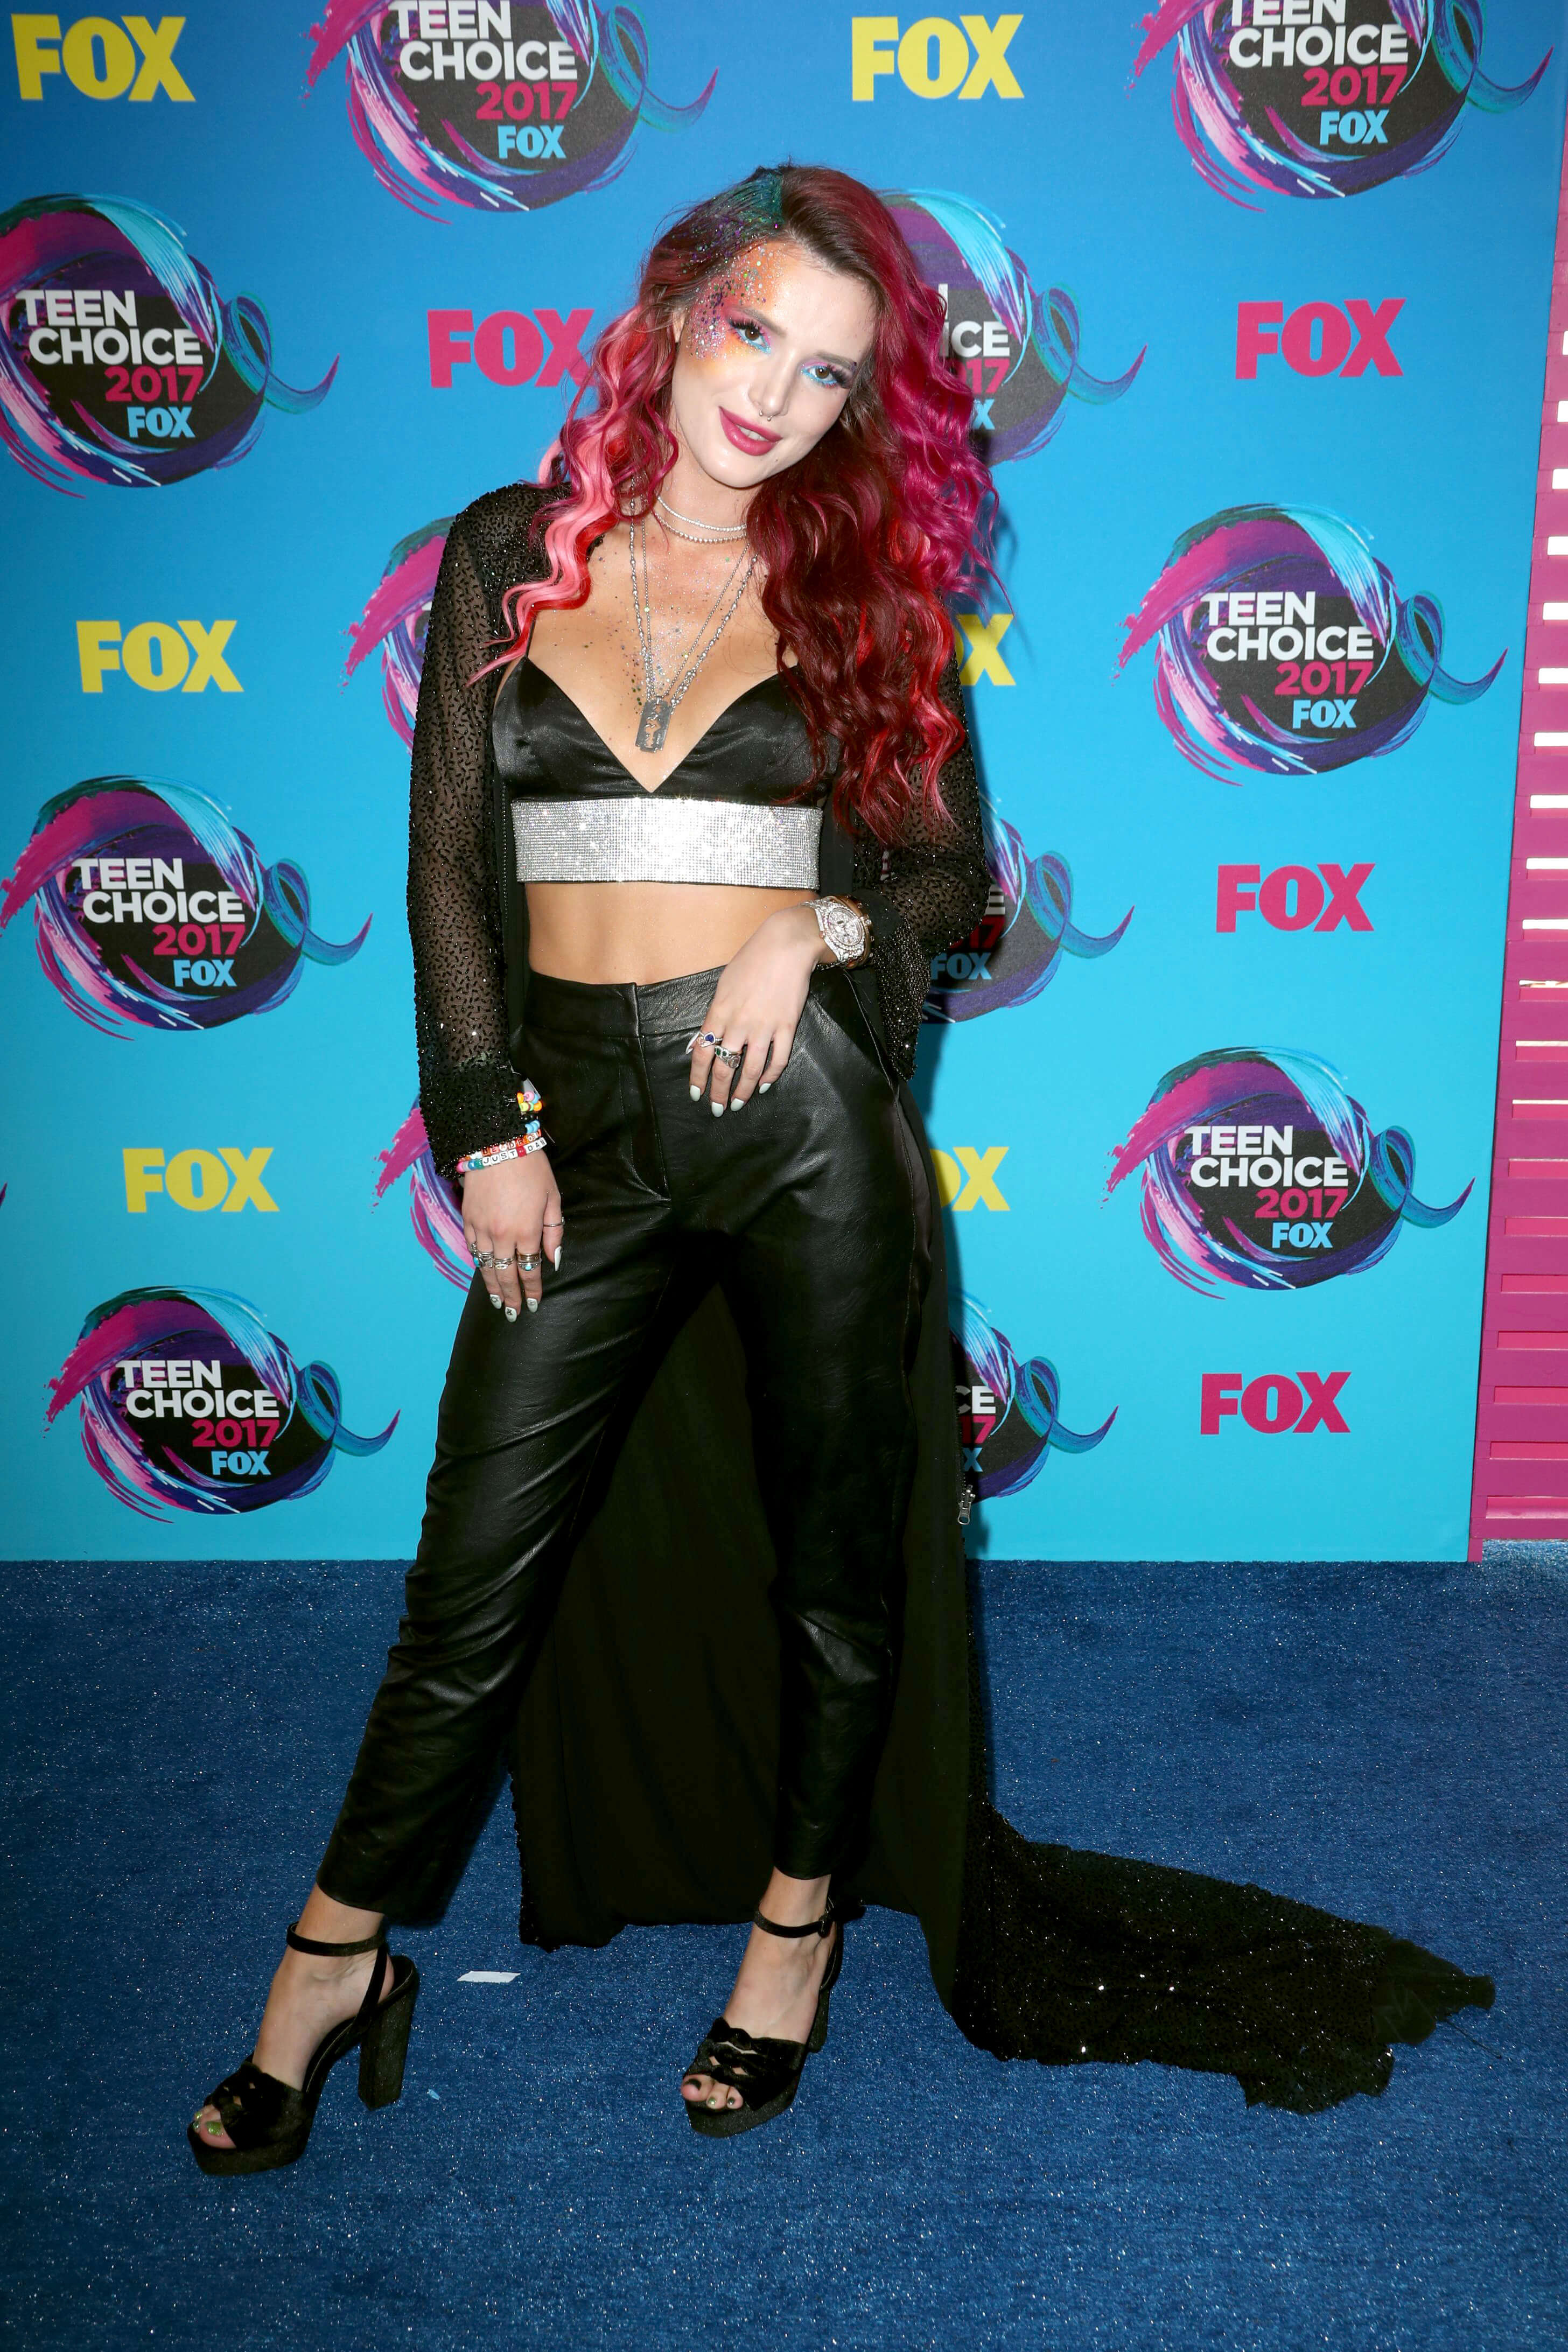 49 Hot Pictures Of Bella Thorne Which Will Make Your Day | Best Of Comic Books